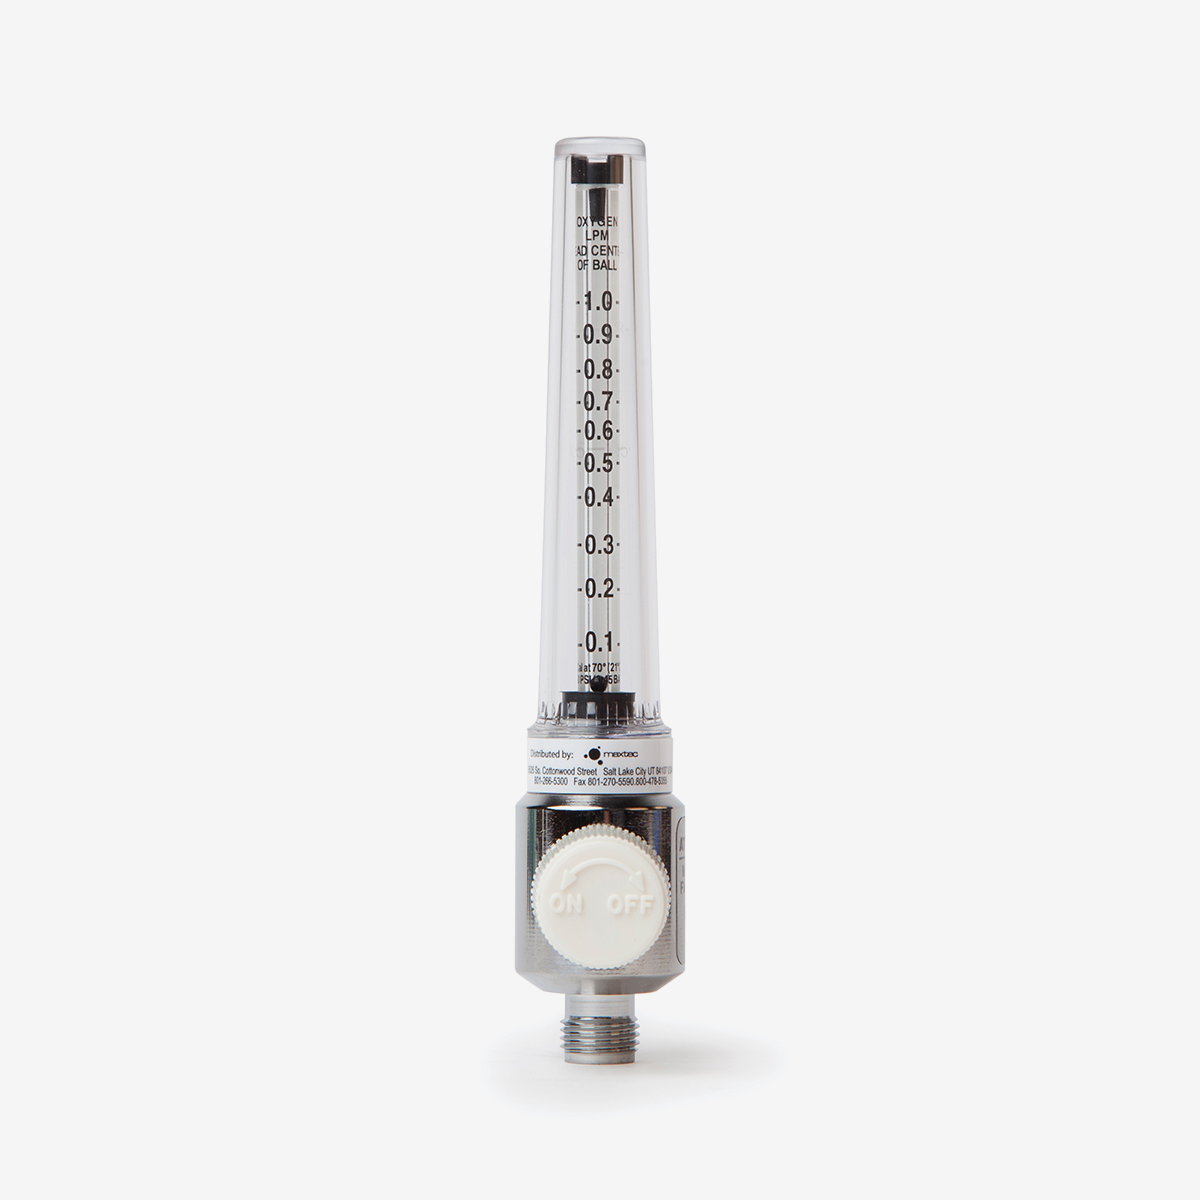 0-1 liters per minute flow meter with white knob